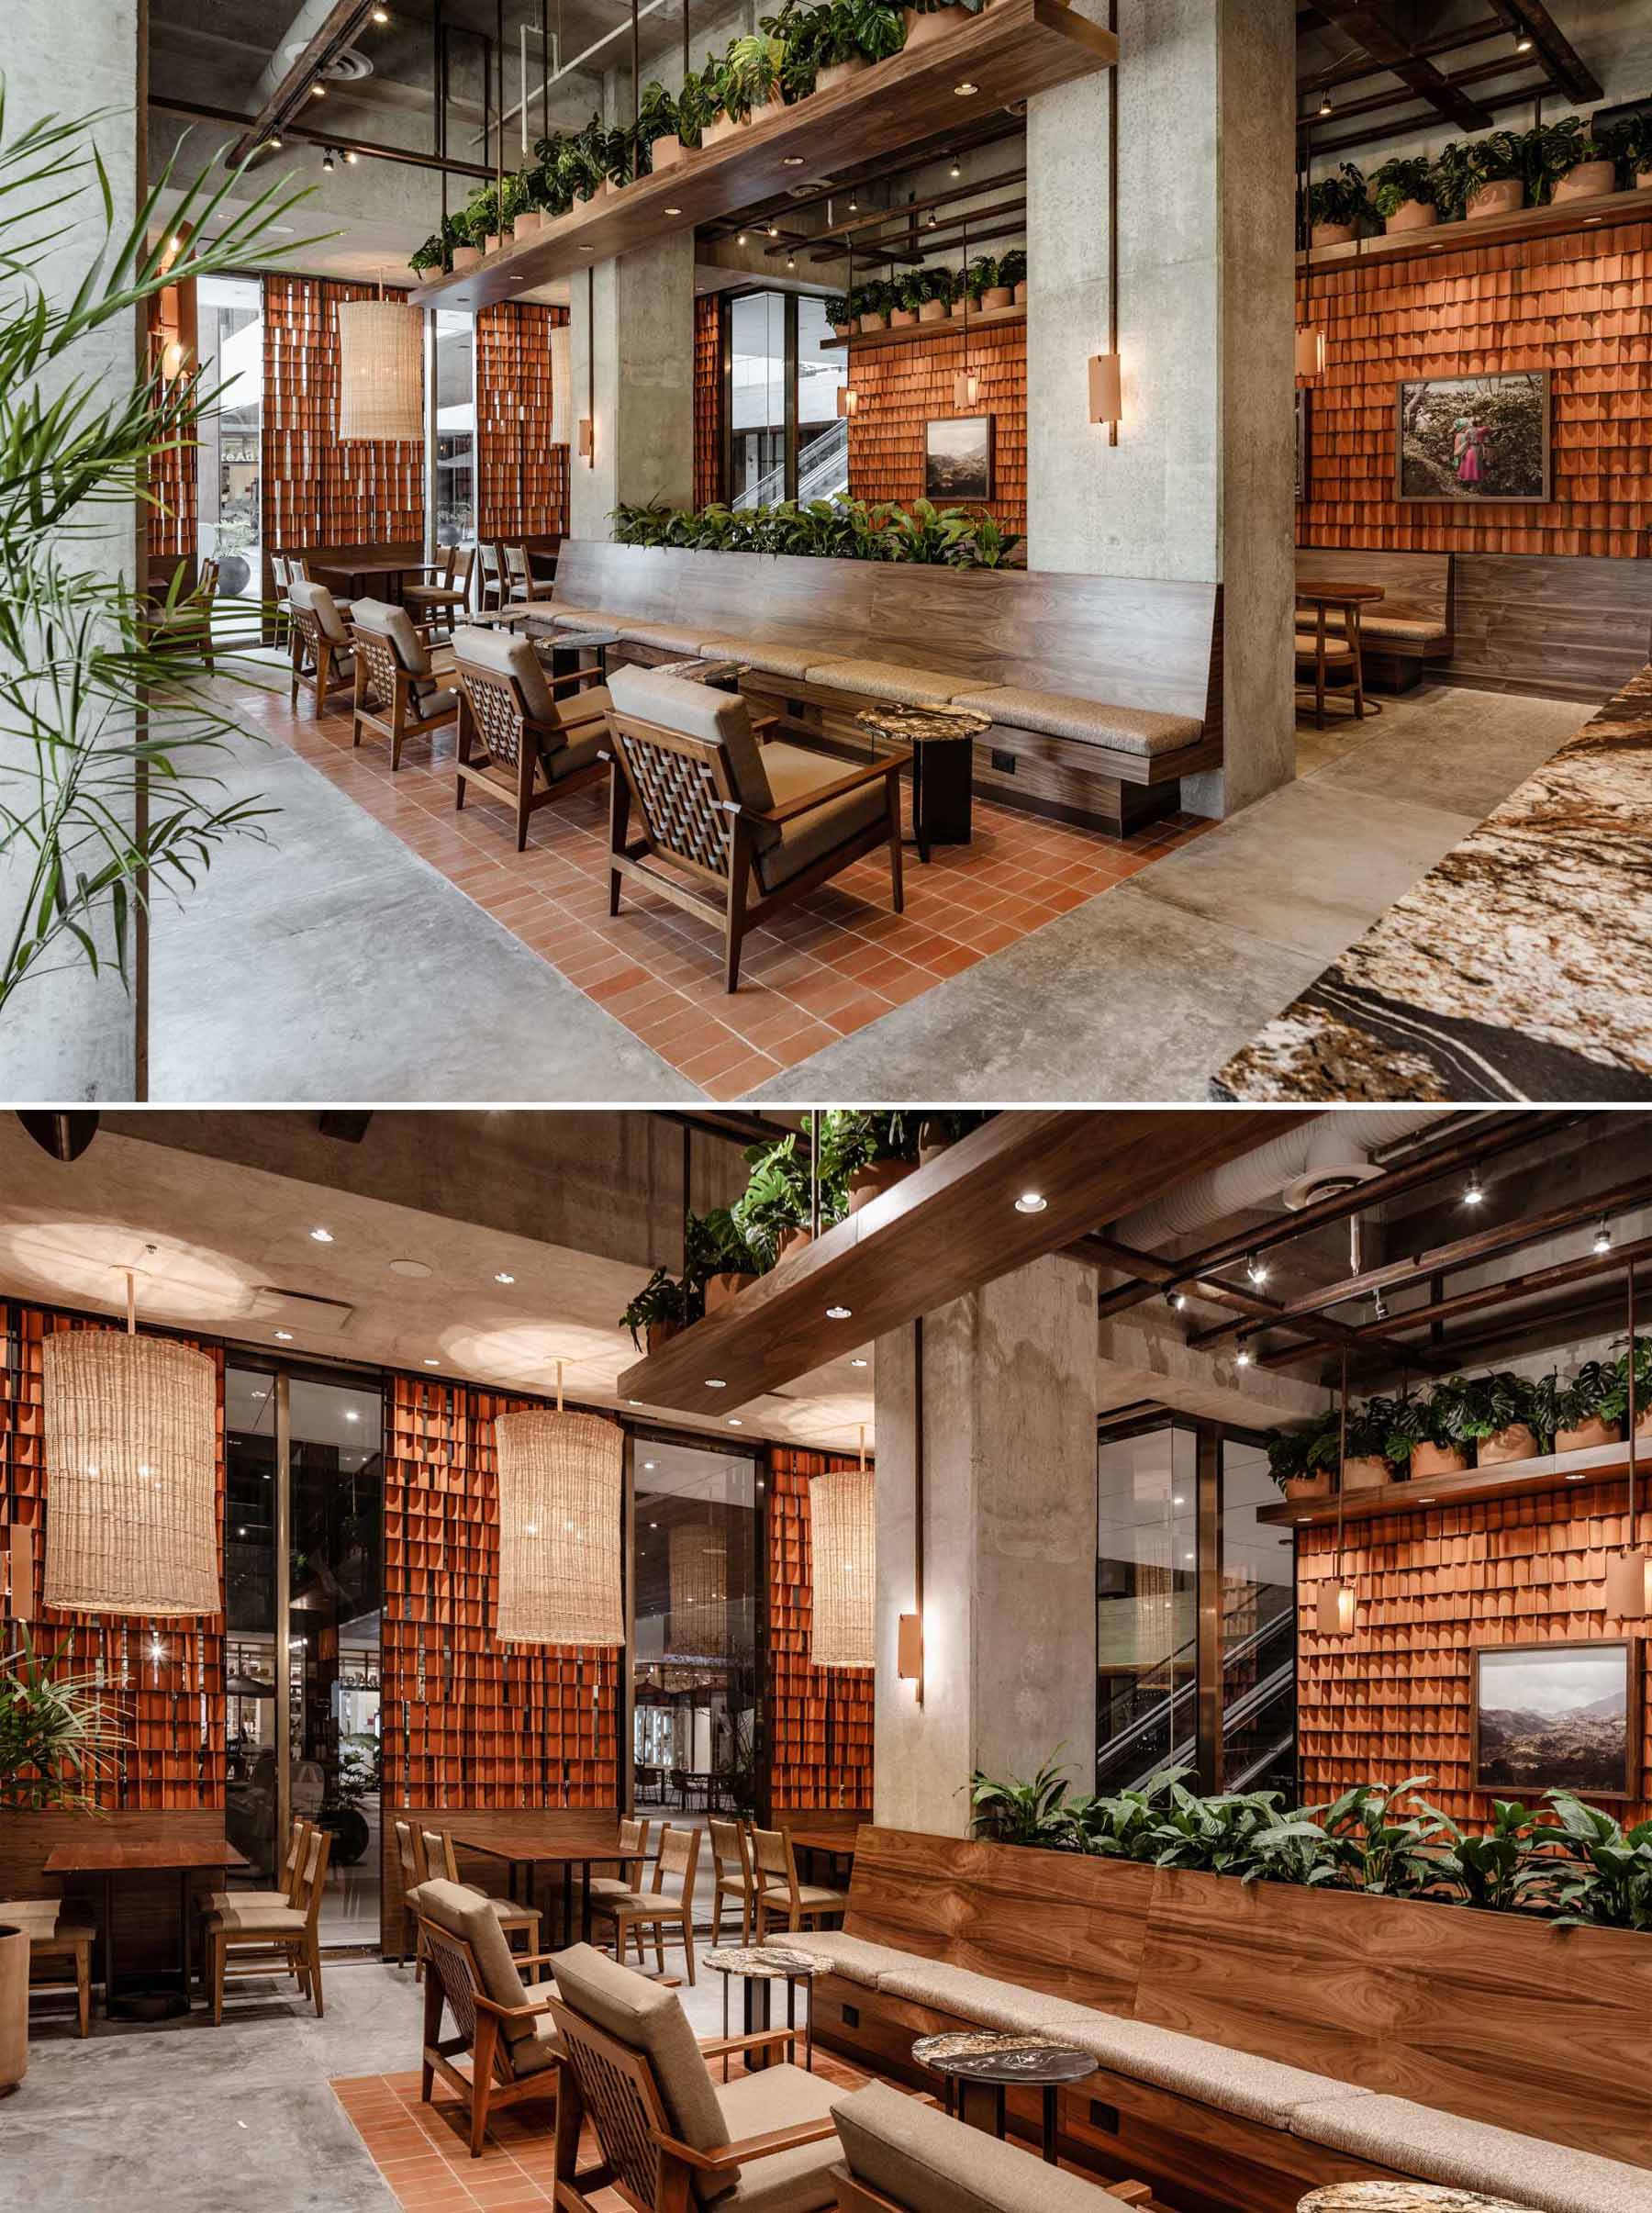 A modern coffee shop uses clay tiles throughout its design, while wood adds to the warmth of the interior.